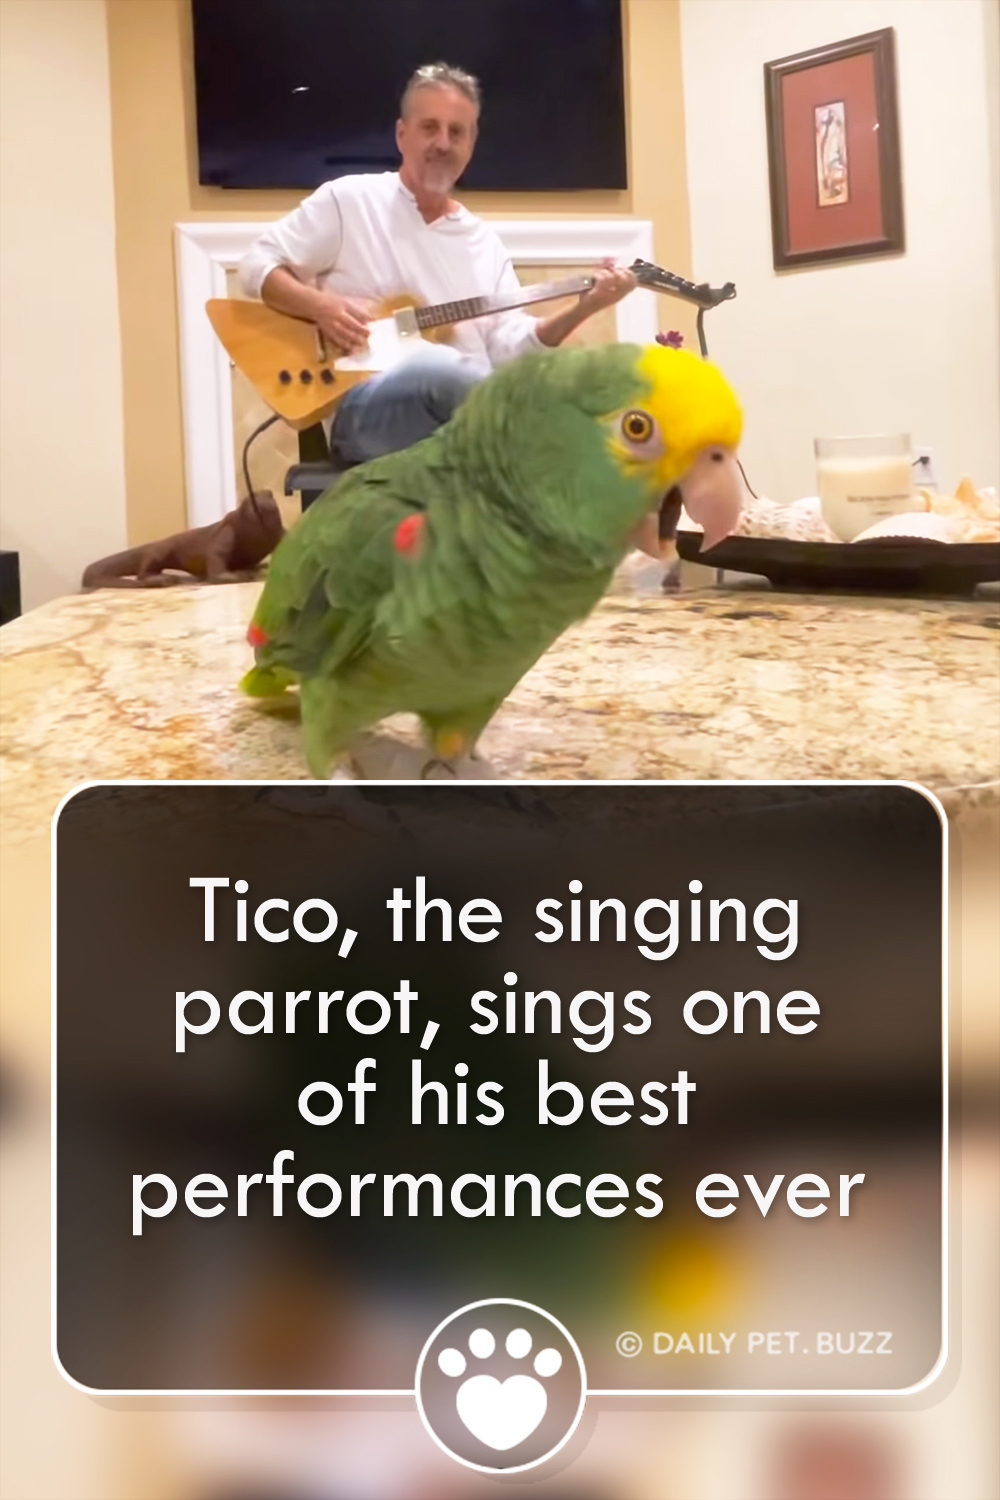 Tico, the singing parrot, sings one of his best performances ever